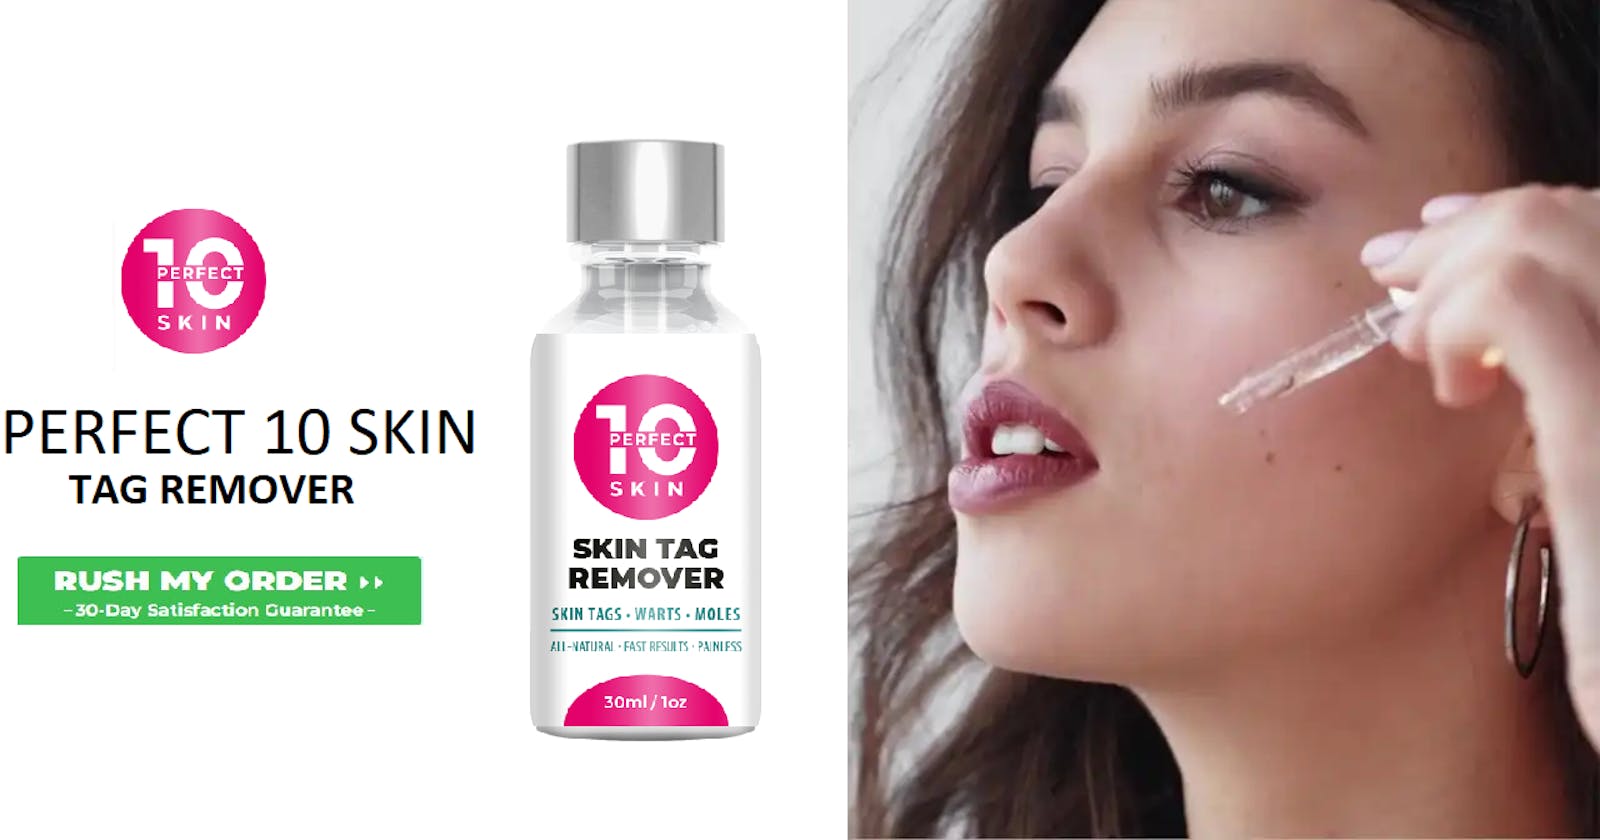 Perfect 10 Skin Tag Remover | Reviews: An Anti-Aging Formula For Wrinkle-Free Skin!